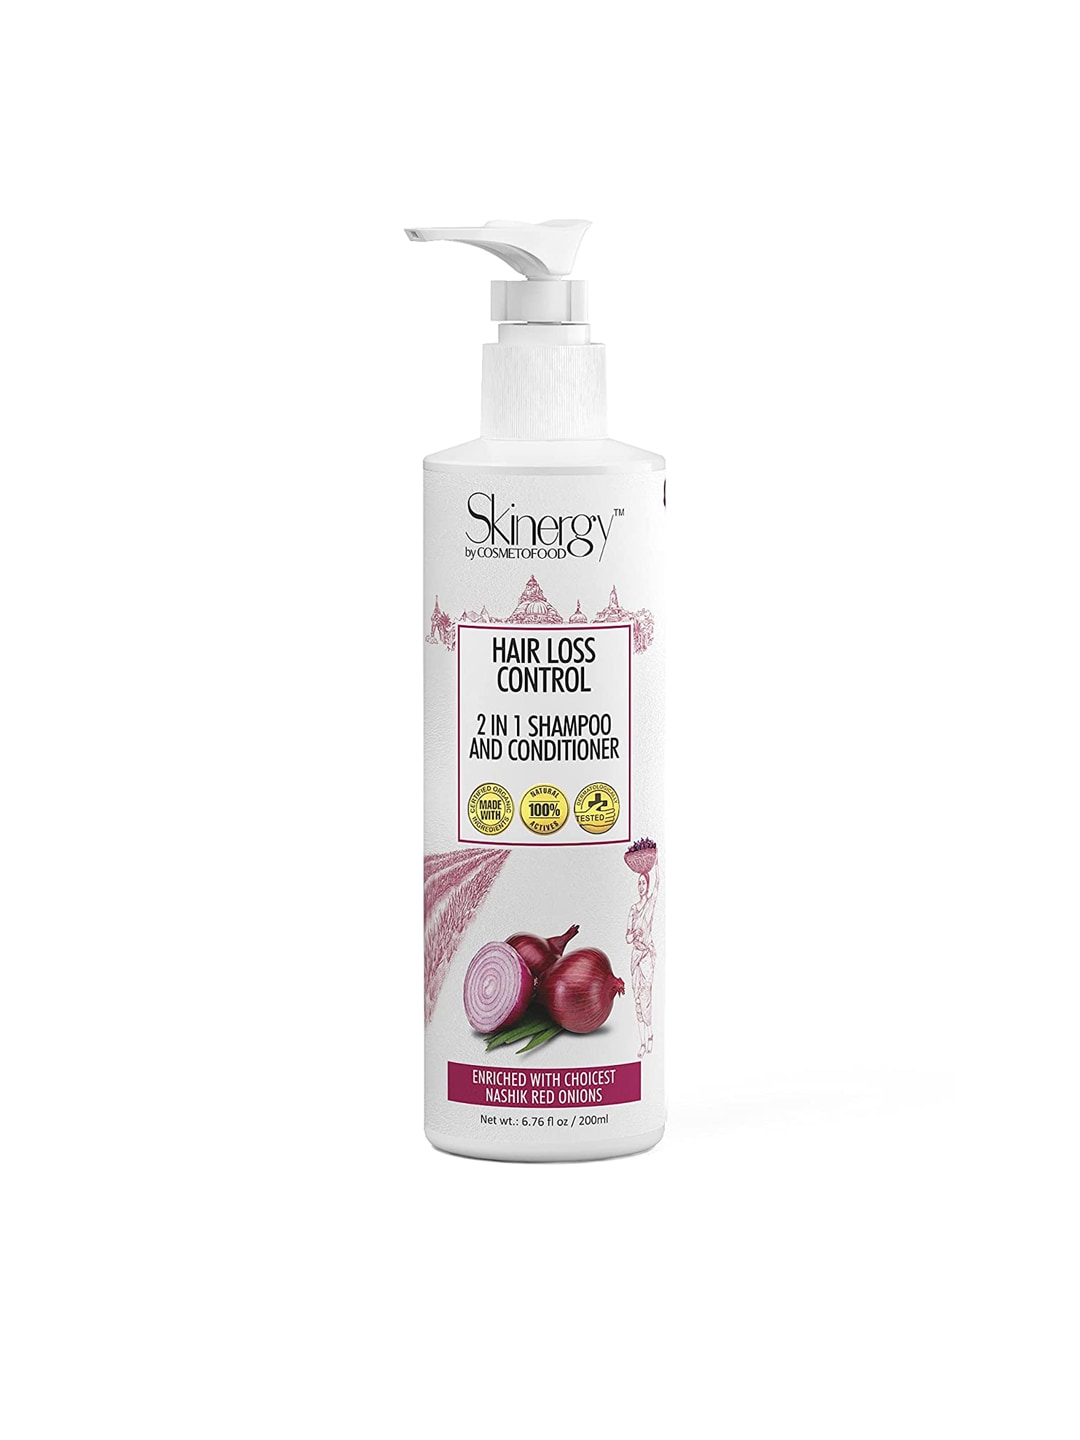 COSMETOFOOD Skinergy Hair Loss Control 2 In 1 Shampoo And Conditioner 200 ml Price in India